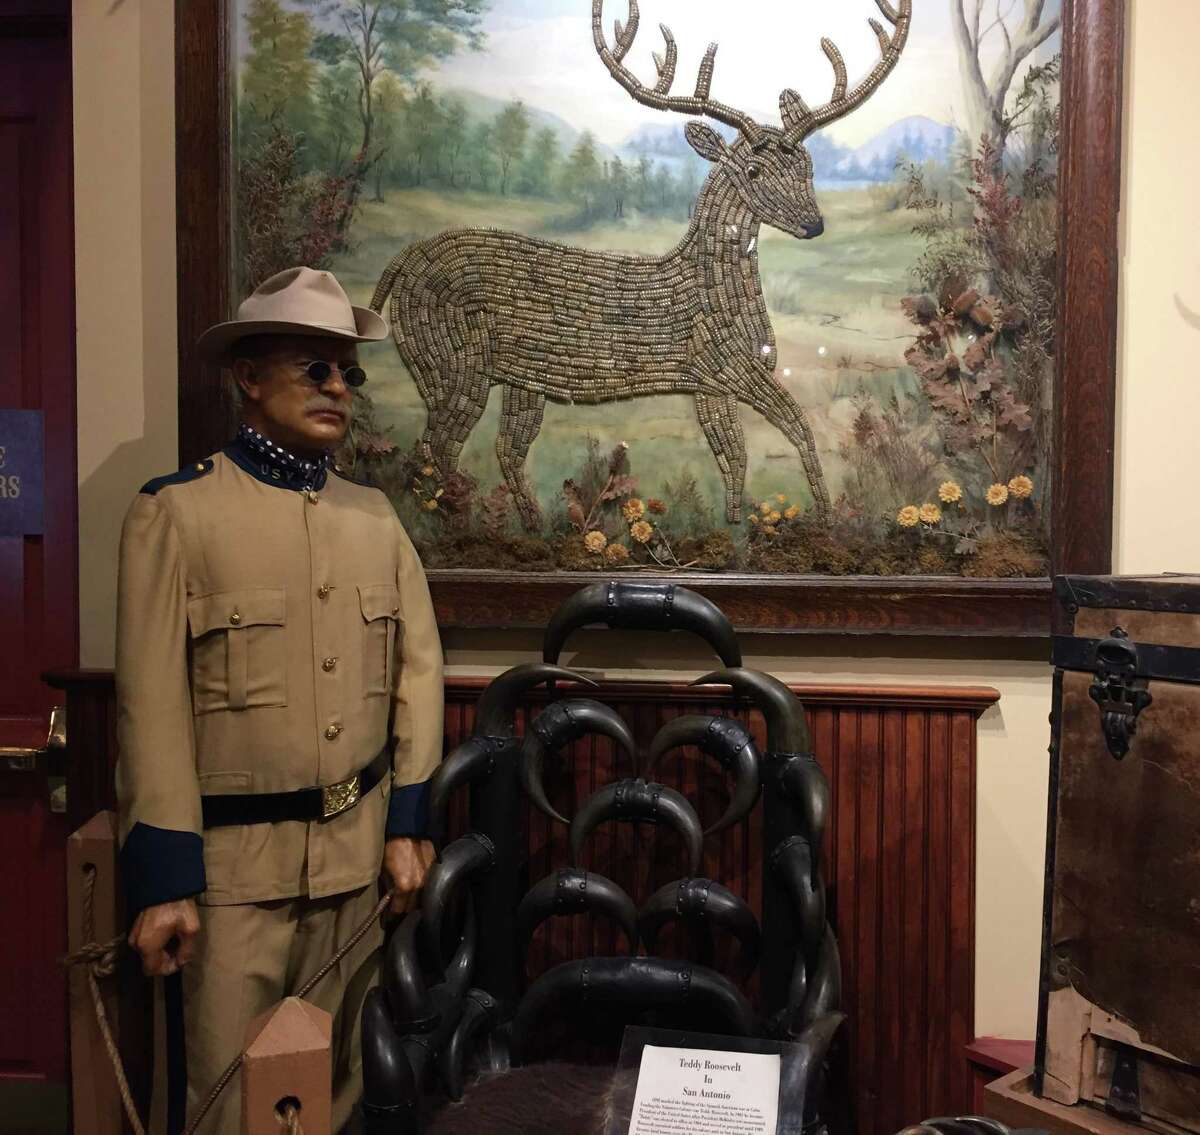 A wax figure of Teddy Roosevelt, one of the historic visitors to the Buckhorn Saloon and Museum, is displayed along with two gifts presented to the U.S. president in 1906 by owners Albert and Emilie Friedrich: a chair made from 52 sets of buffalo horns and a white-tailed deer picture fashioned from 637 rattlesnake rattles.